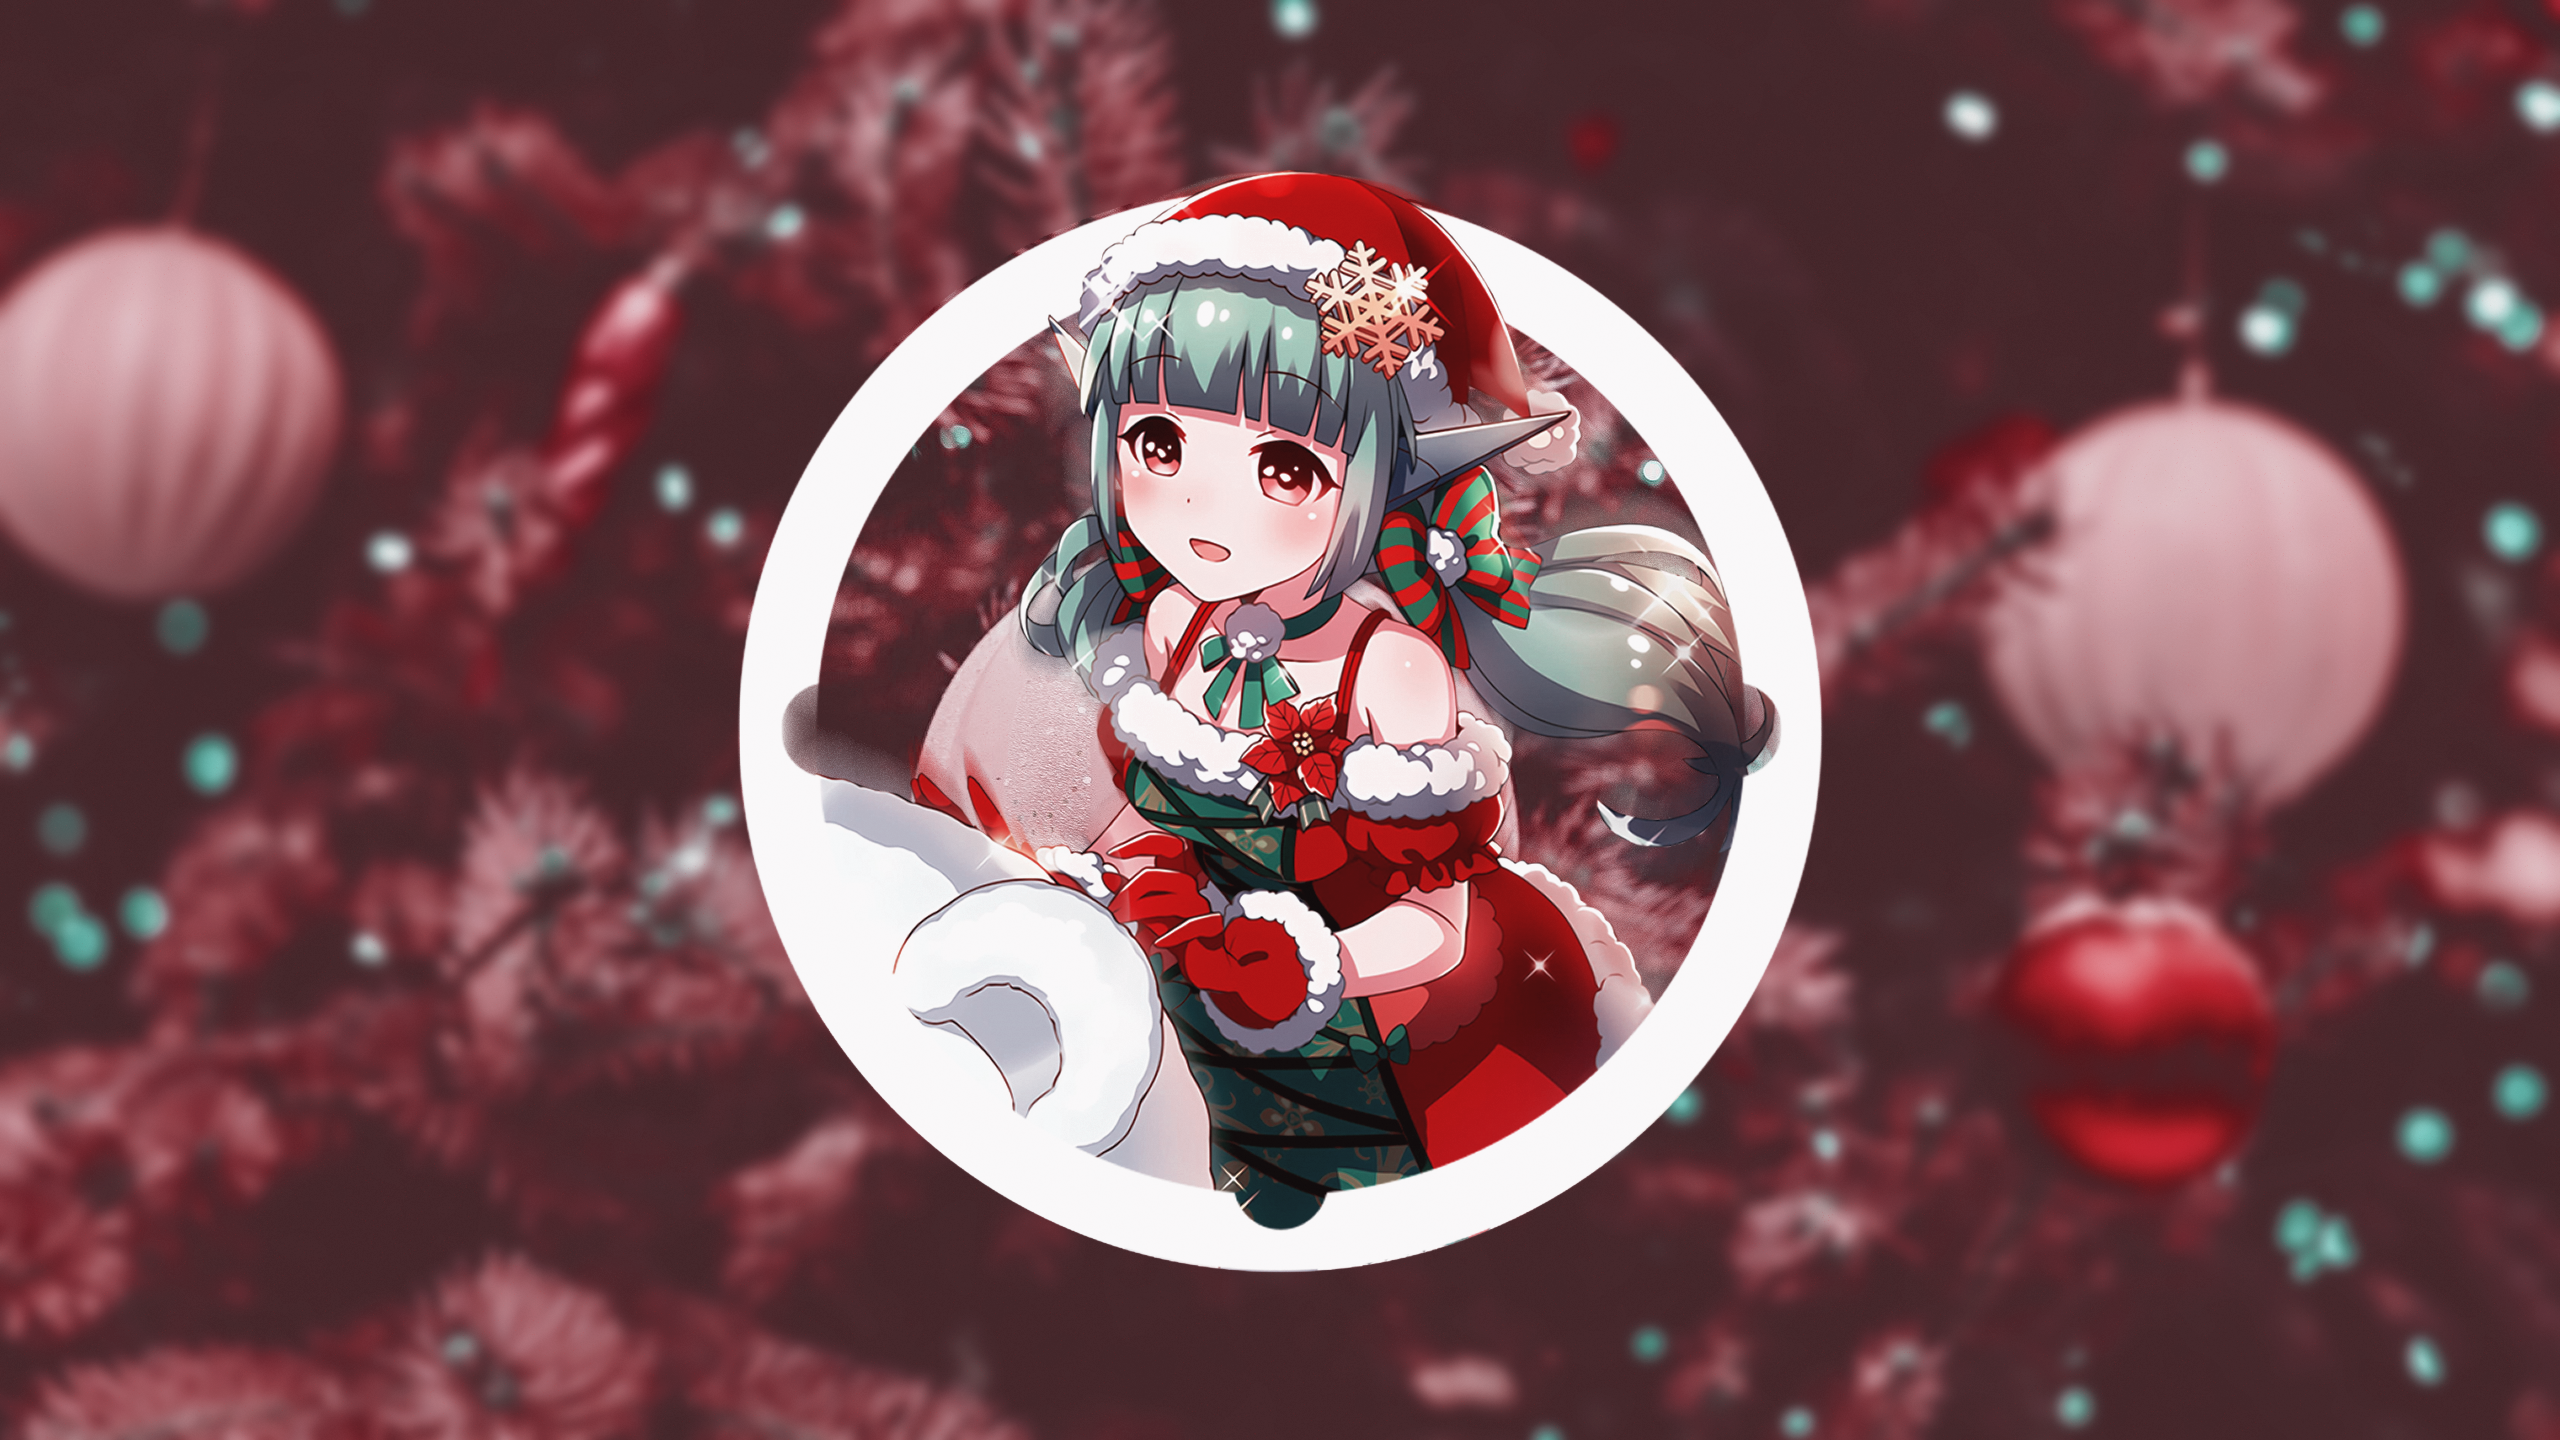 Piture In Picture Christmas Anime Girls Wallpaper:2560x1440